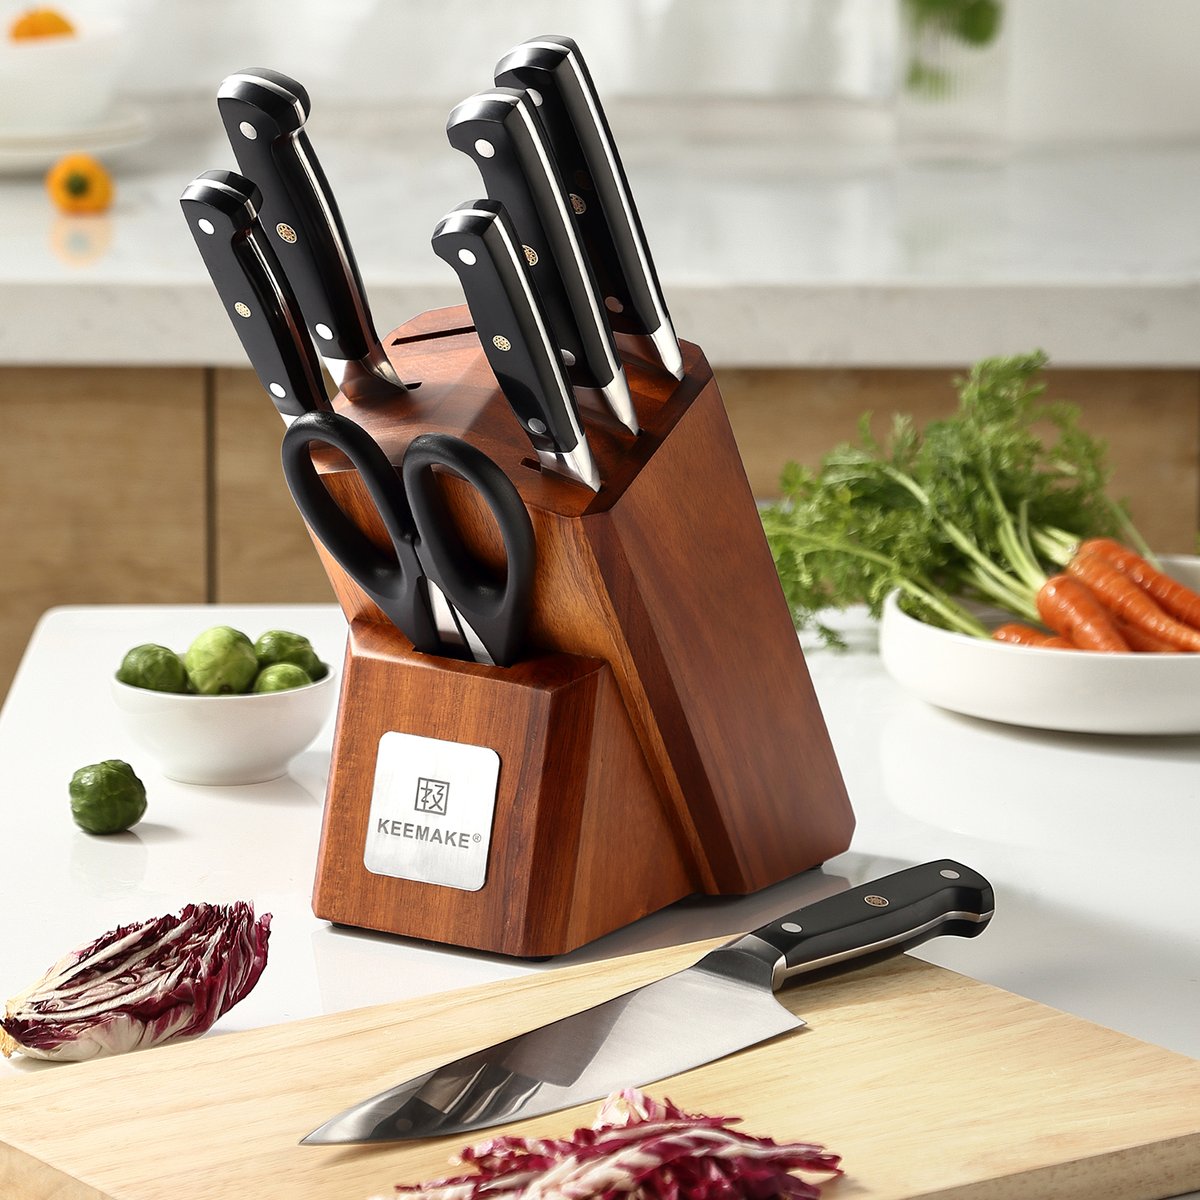 Upgrade your kitchen with the KEEMAKE 8-Piece Knife Set! Made from premium German stainless steel, this set offers unmatched durability and razor-sharp precision. Perfect for all your cooking needs! 🍴🔪 #KEEMAKE #KitchenKnifeSet #CookingEssentials